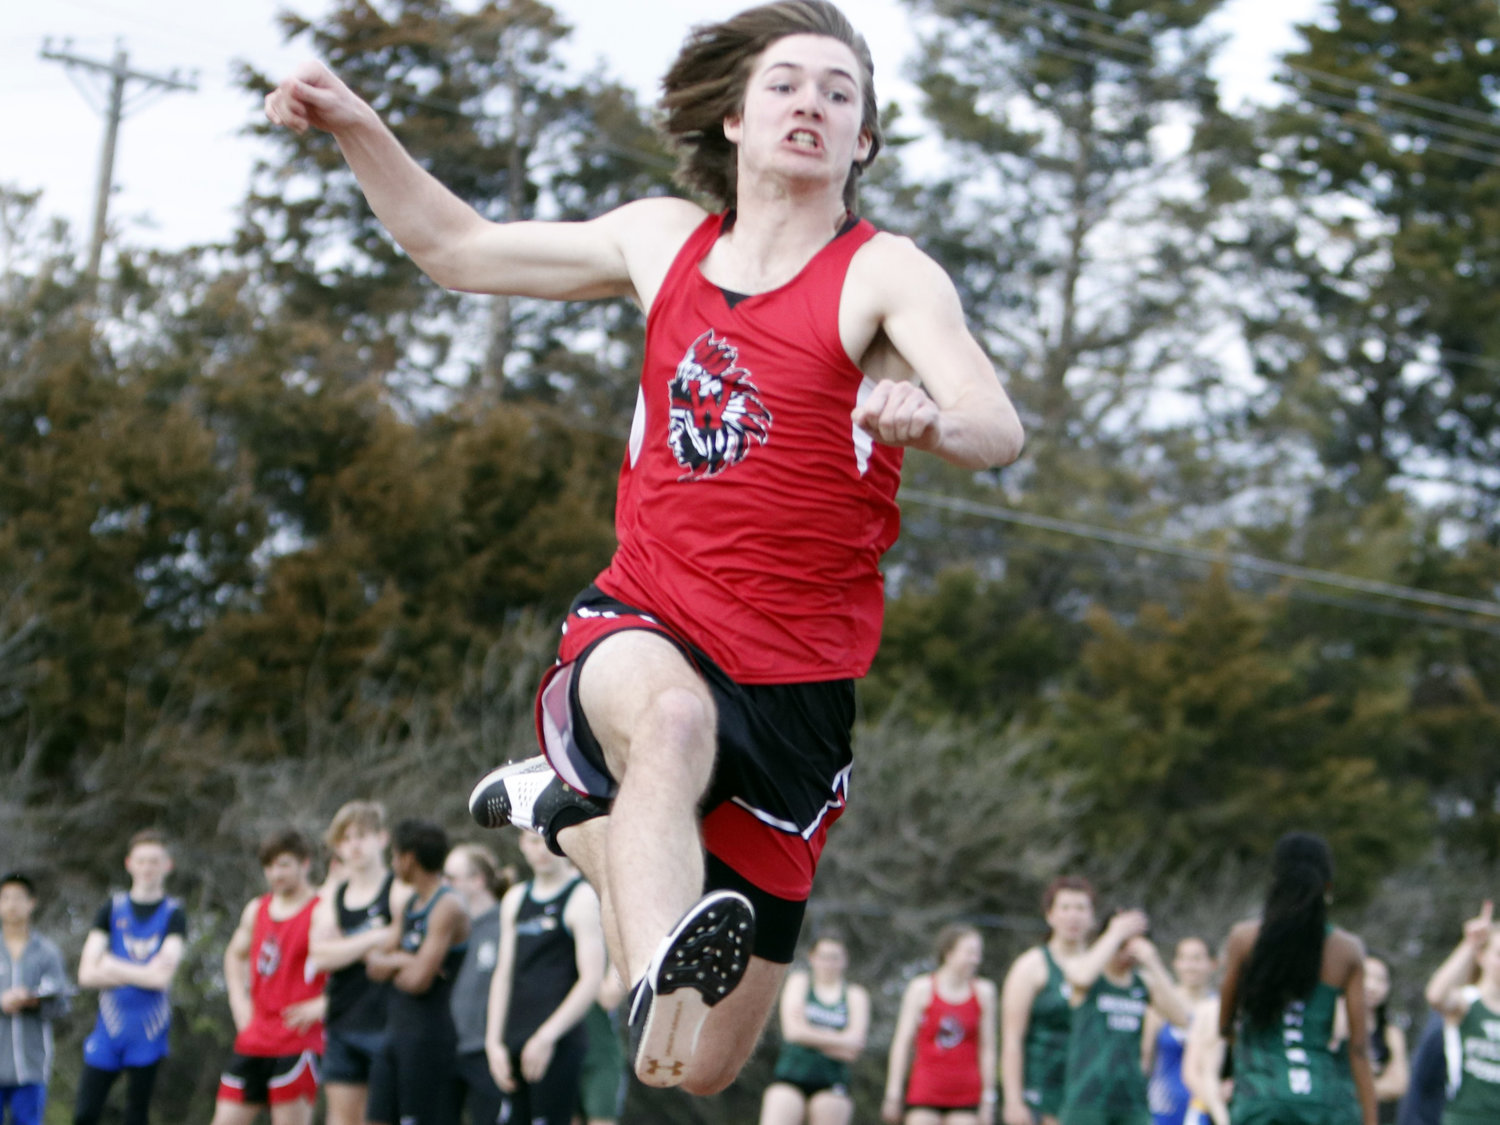 Warrenton's Colton Brosenne competes at the Wright City Warm Up Meet earlier this season. Brosenne placed first in the triple jump at the Union Invitational Tuesday.